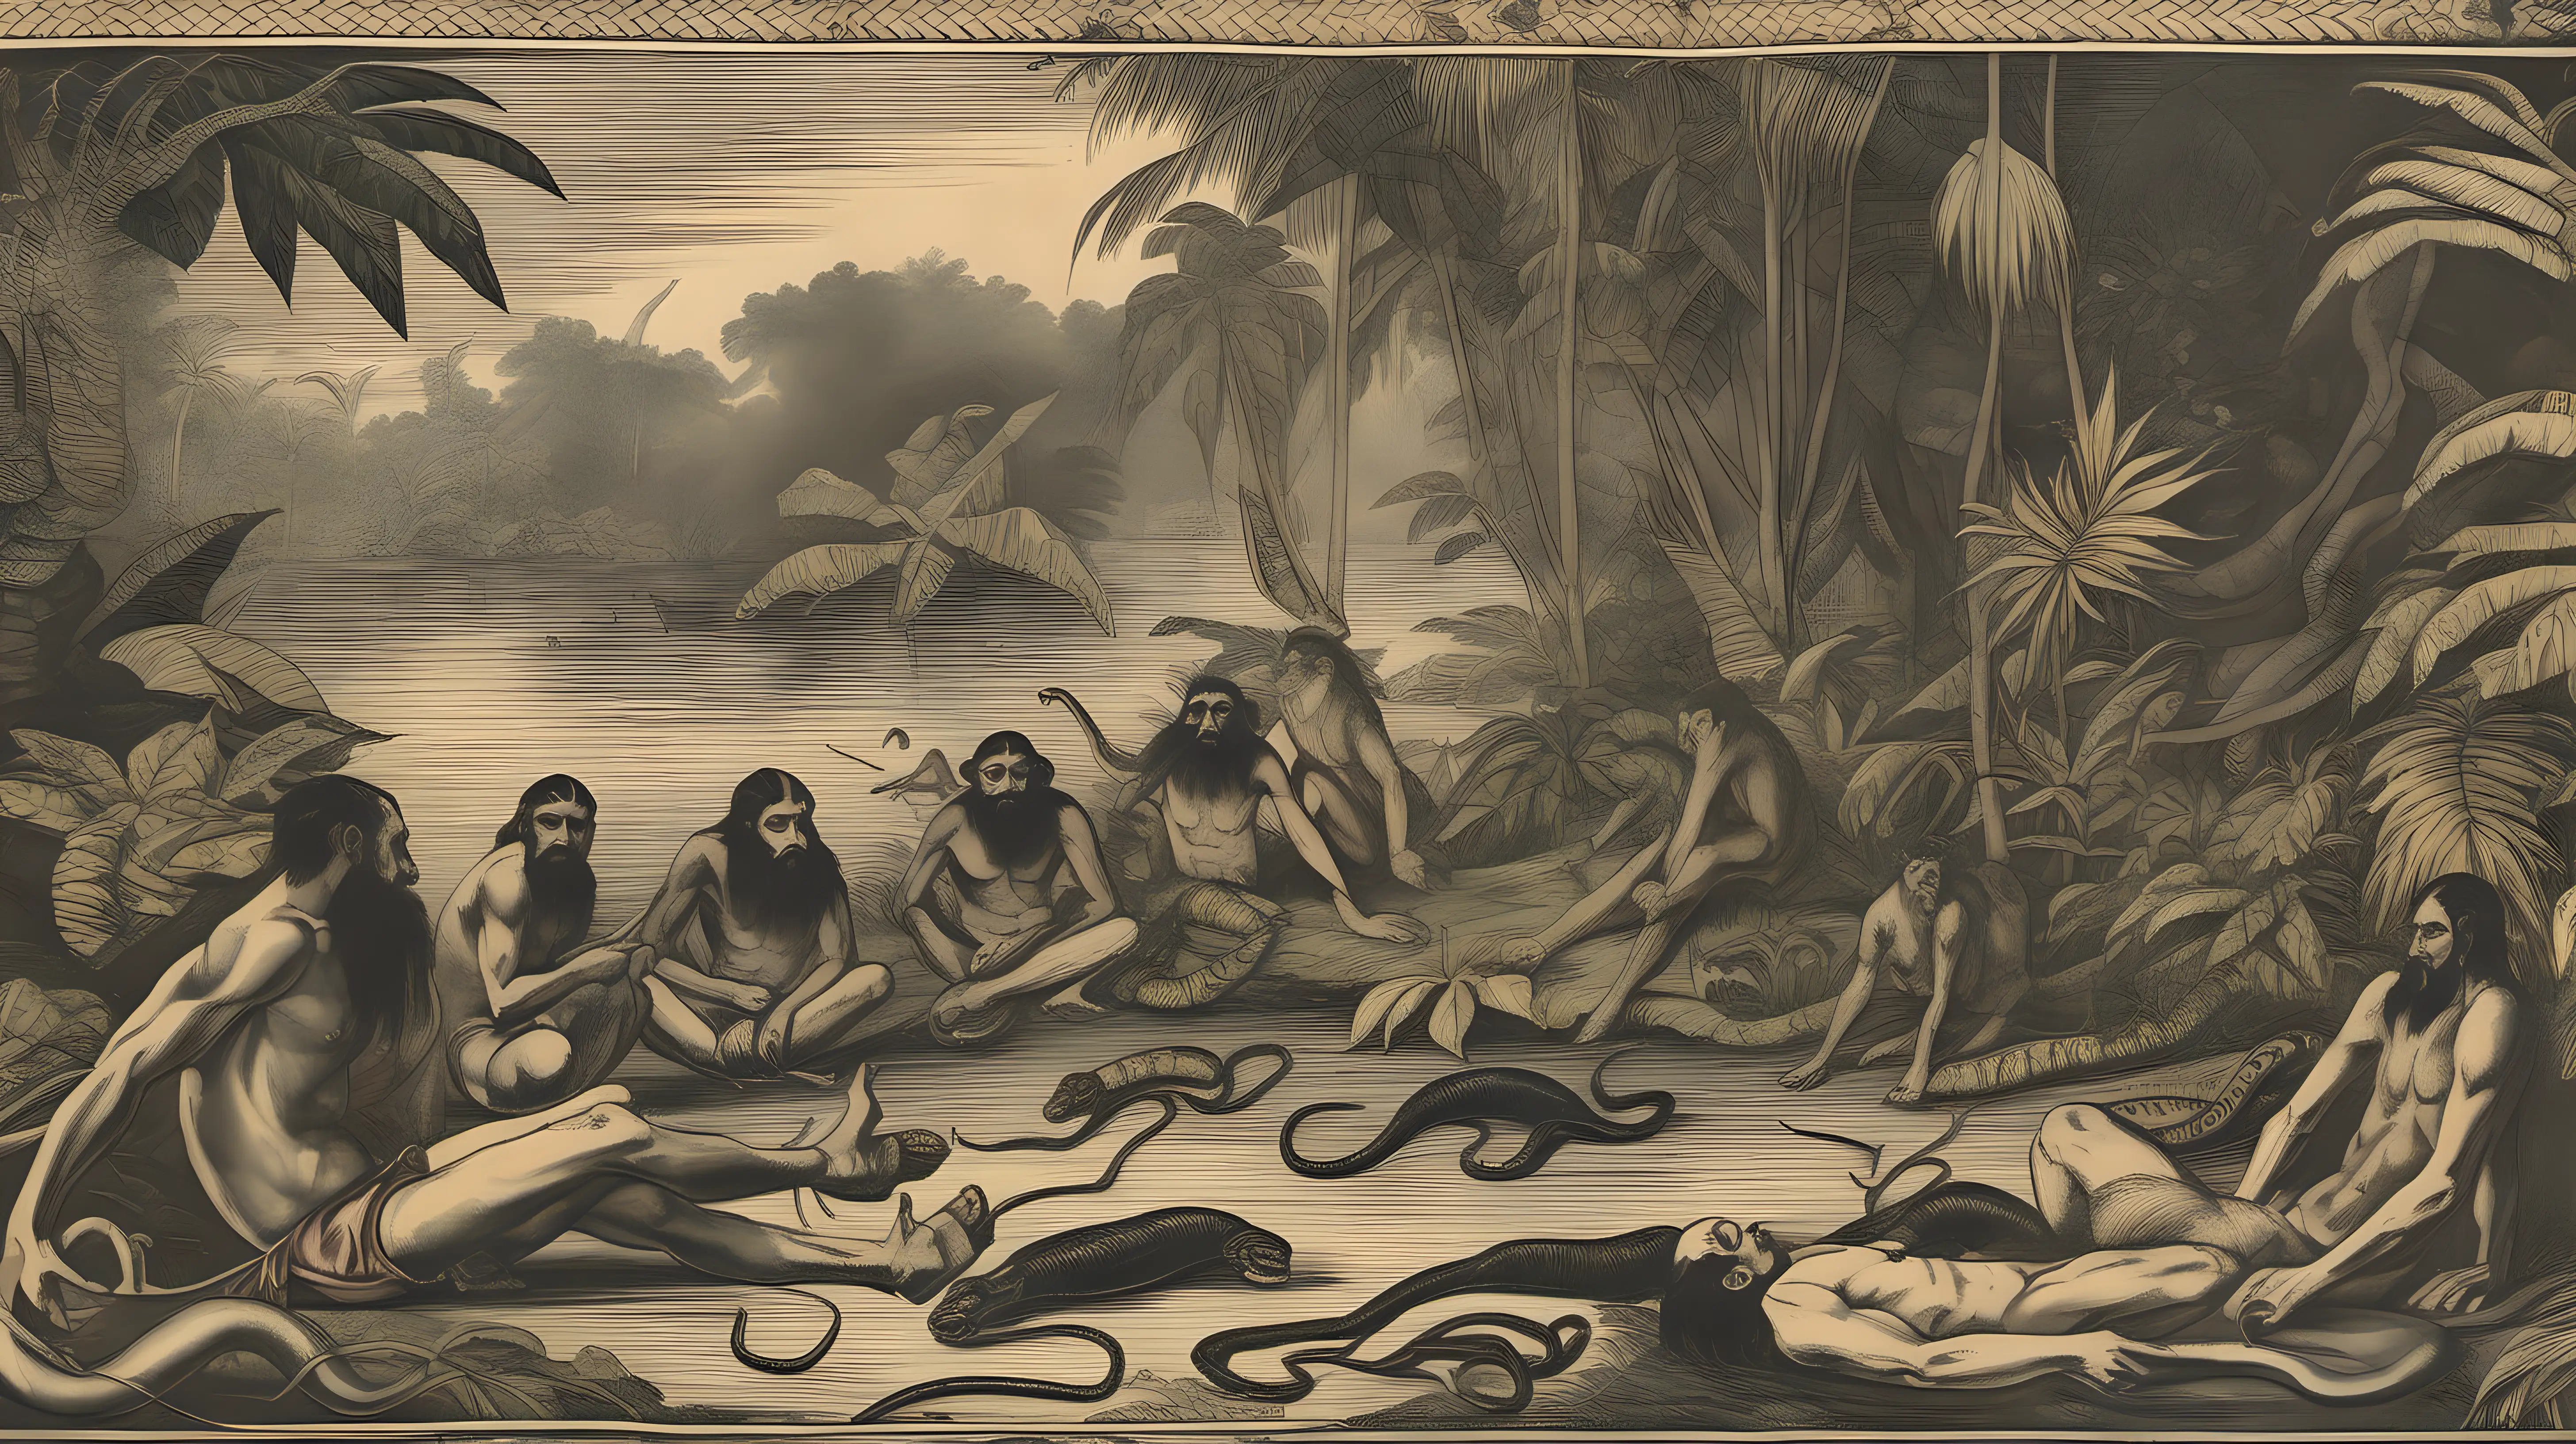 16th Century Spanish Man Resting by Amazon River with Shaman and Primal Figures in Theodore de Bry Style